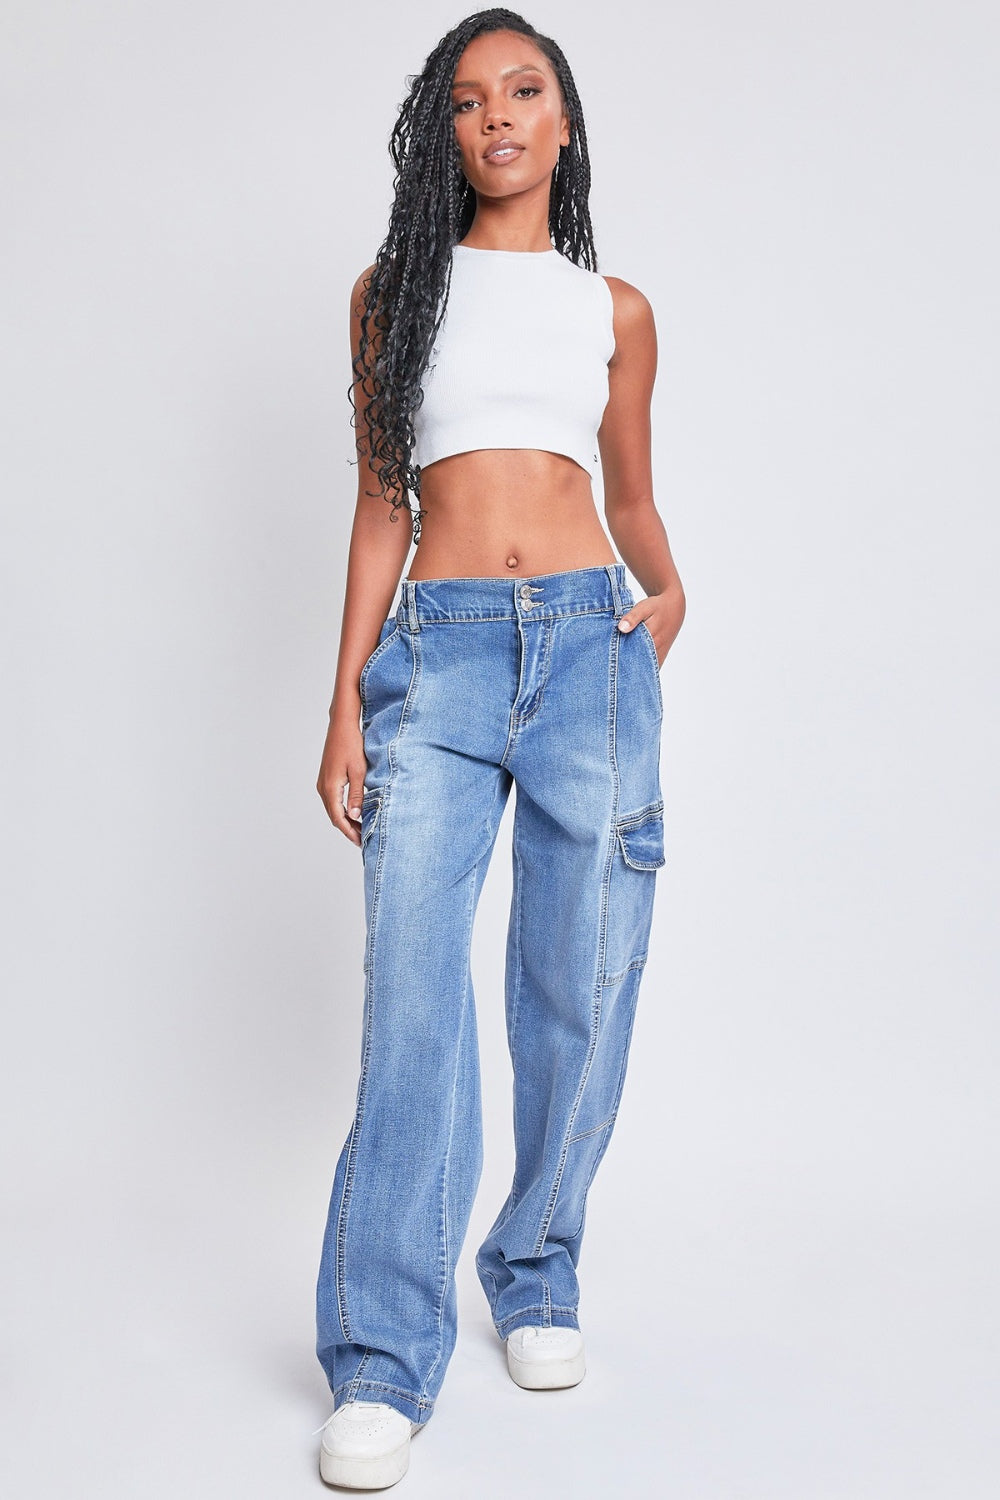 Jeanswear High-Rise Straight Cargo Jeans